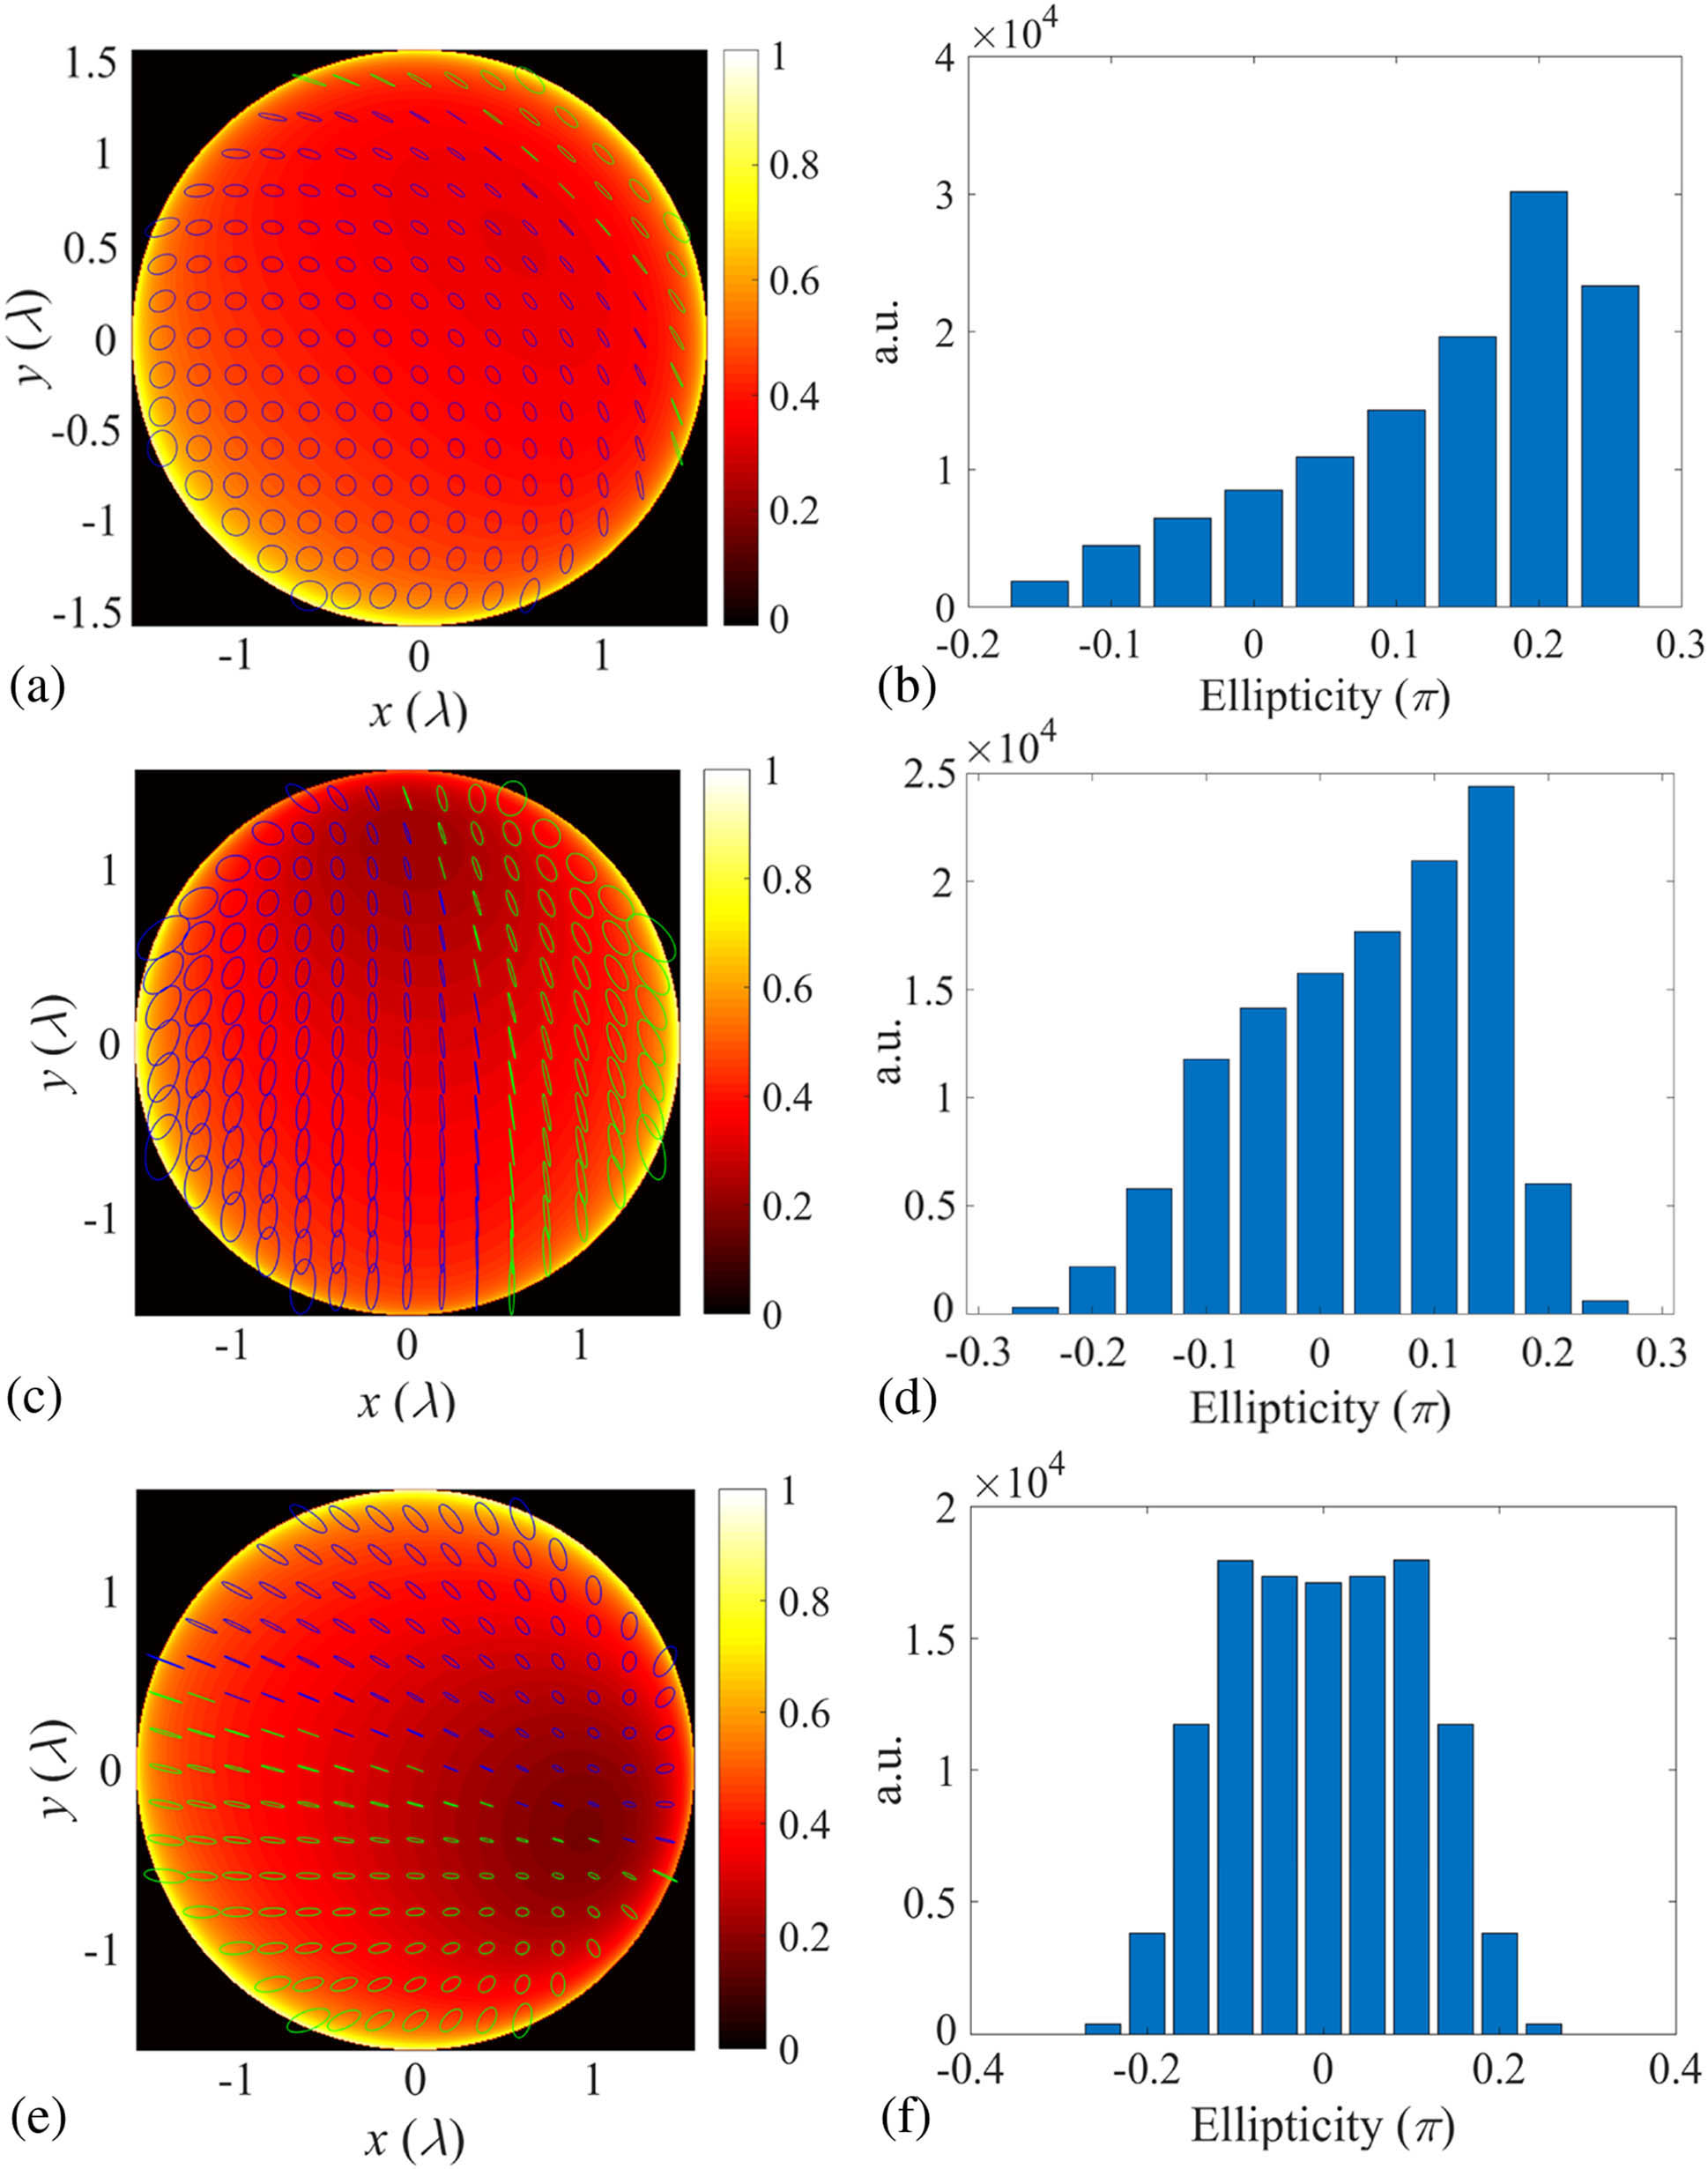 (a), (c), and (e) Intensity distribution superimposed with polarization map. (b), (d), and (f) Histogram of ellipticity of the ideal incident pupil field for generating (a) photonic spin orientated along (α,β,γ)=(60°,60°,45°), (c) photonic spin with ellipticity of 2 and orientation along (α,β,γ)=(20°,80°,73°), and (e) photonic spin with elevation angle of −45° and orientation along (α,β,γ)=(110°,20°,90°).